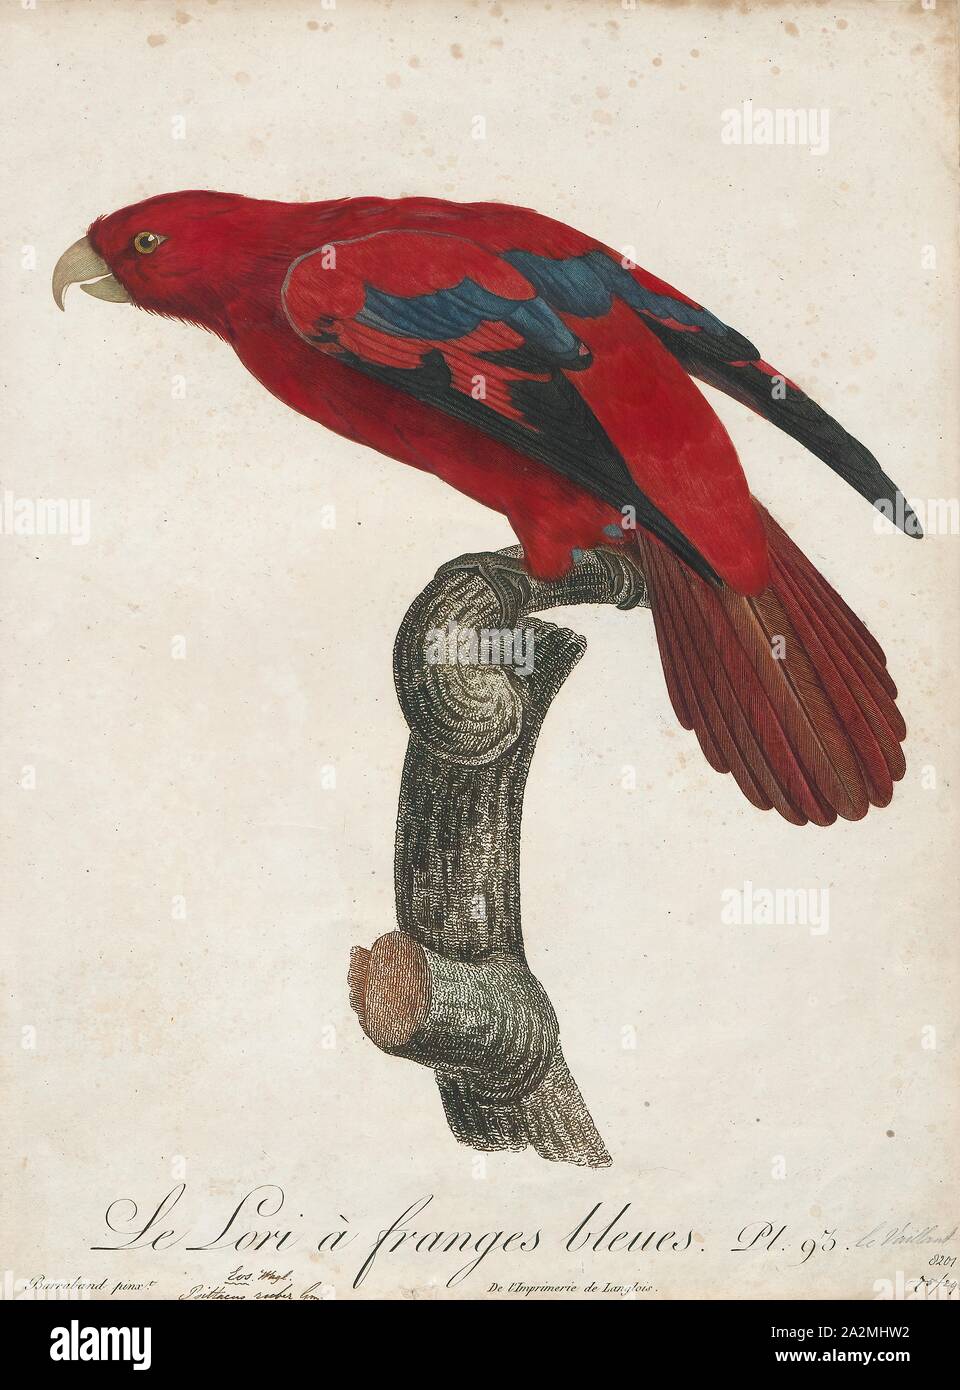 Eos rubra, Print, The red lory (Eos bornea) is a species of parrot in the family Psittaculidae. It is the second most commonly kept lory in captivity, after the rainbow lorikeet., 1796-1808 Stock Photo